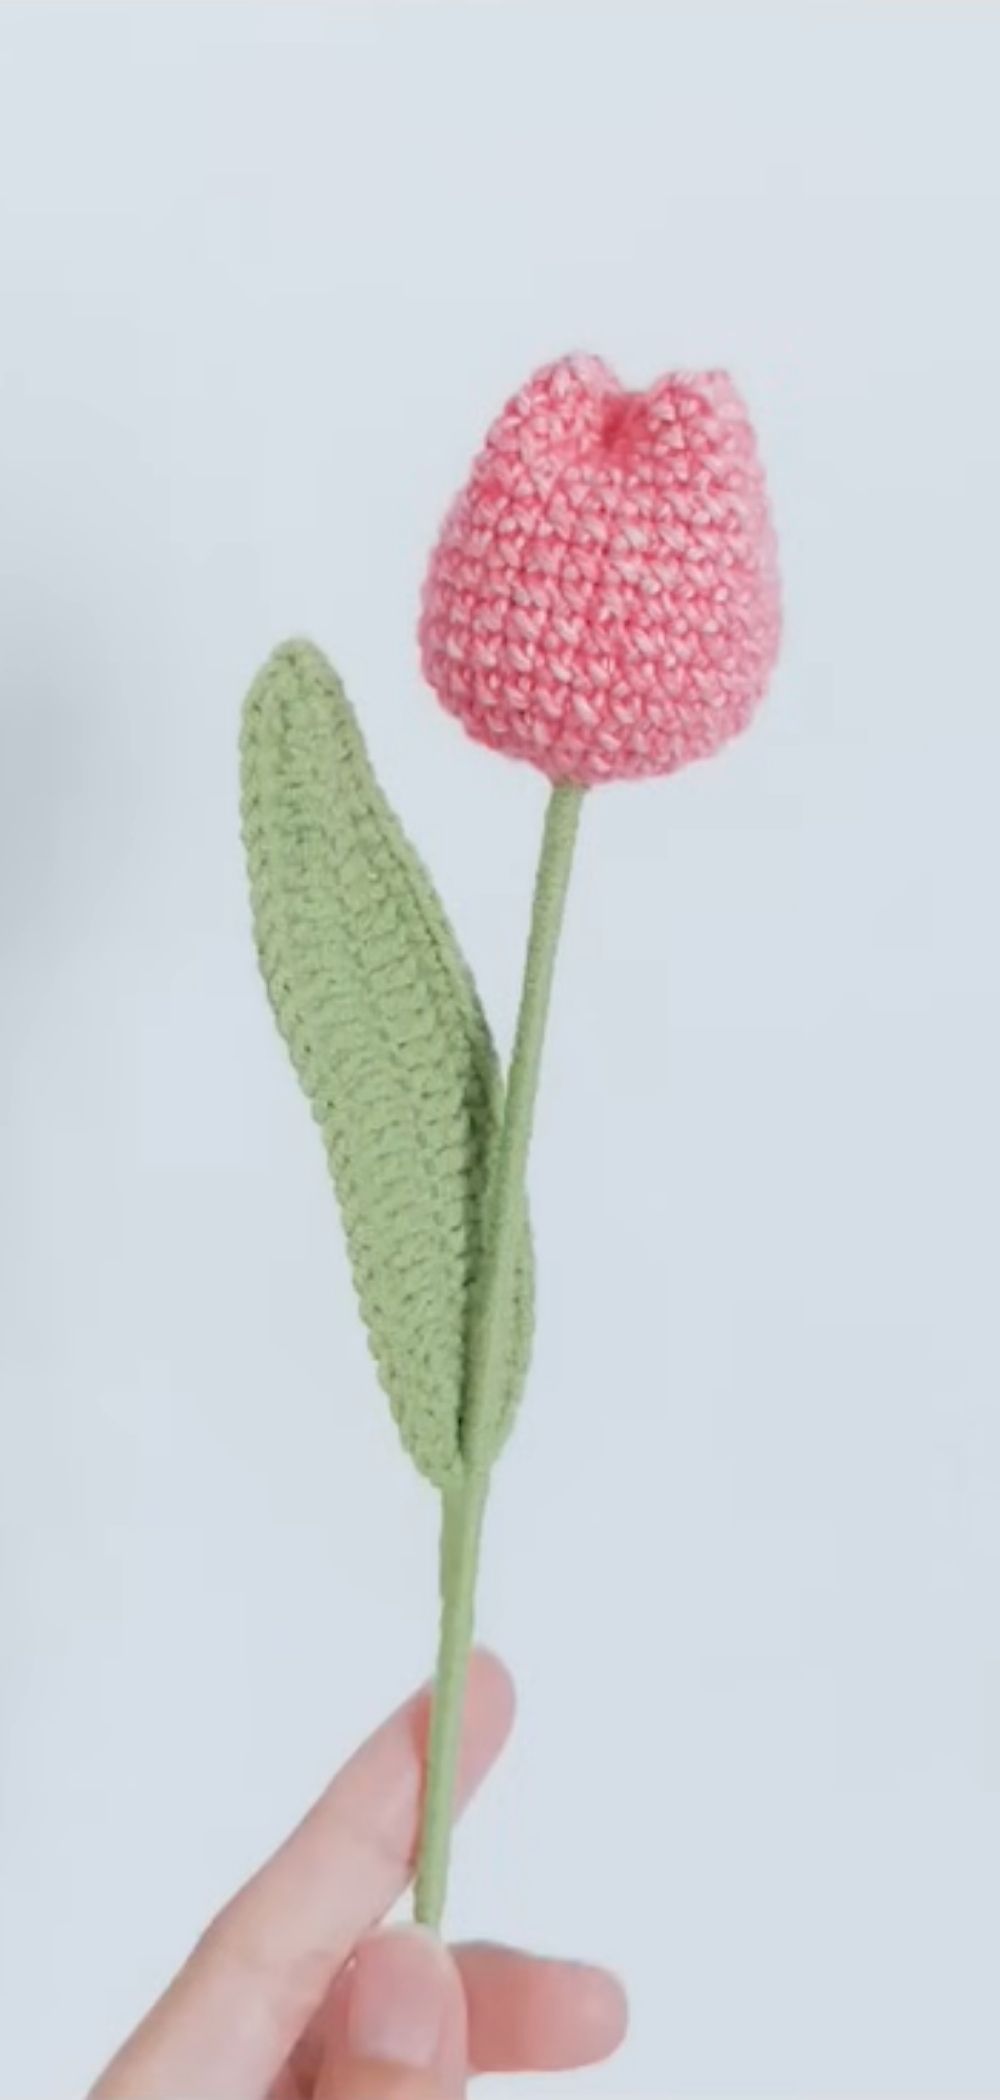 Handcrafted crochet tulip flowers in vibrant colors against a white background.